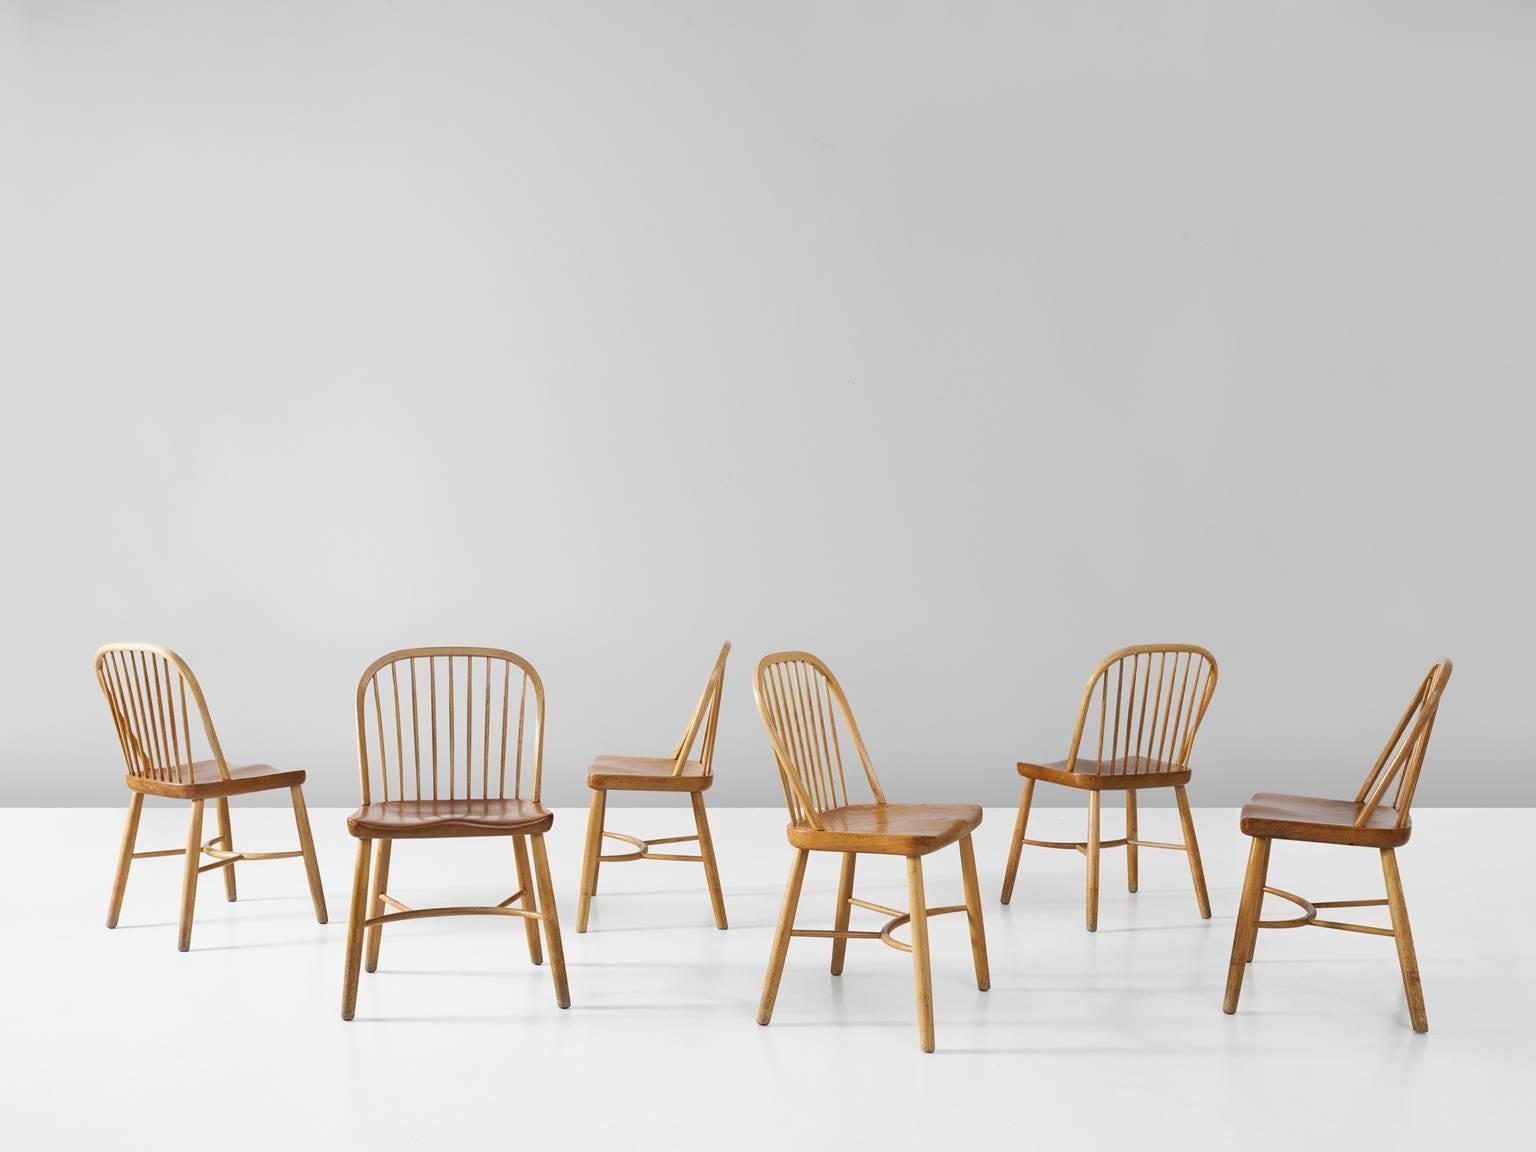 Set of six dining chairs, in beech and teak by Palle Suenson, Denmark, 1940s.

Six spindle back chairs in beech with a teak seating. These chairs were designed by Palle Suenson in the 1940s when he was working on the offices for the Aarhus Oil